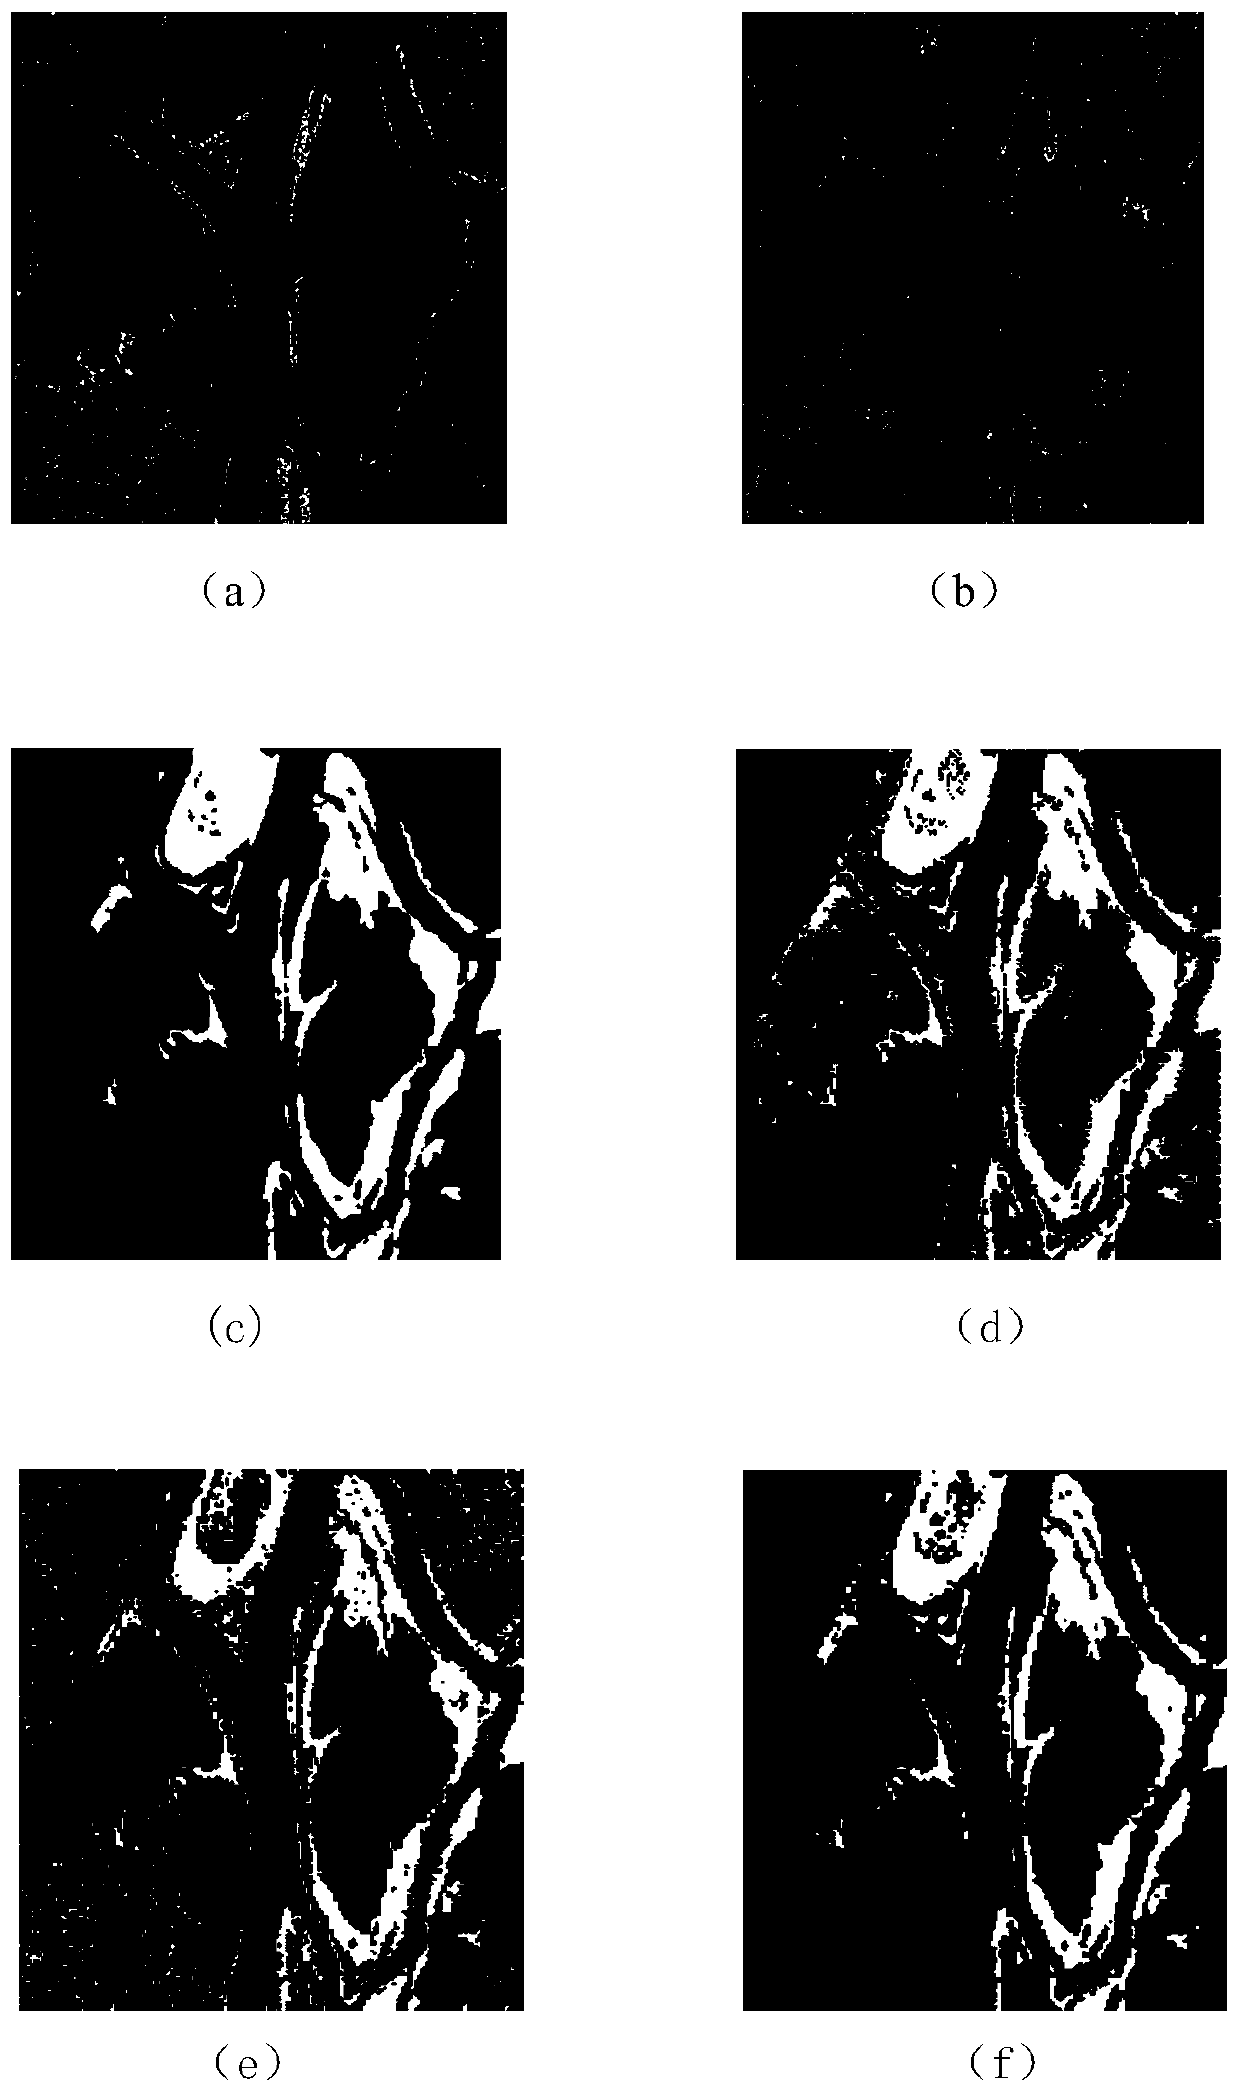 Algorithm for detection of changing regions in sar images based on self-paced learning